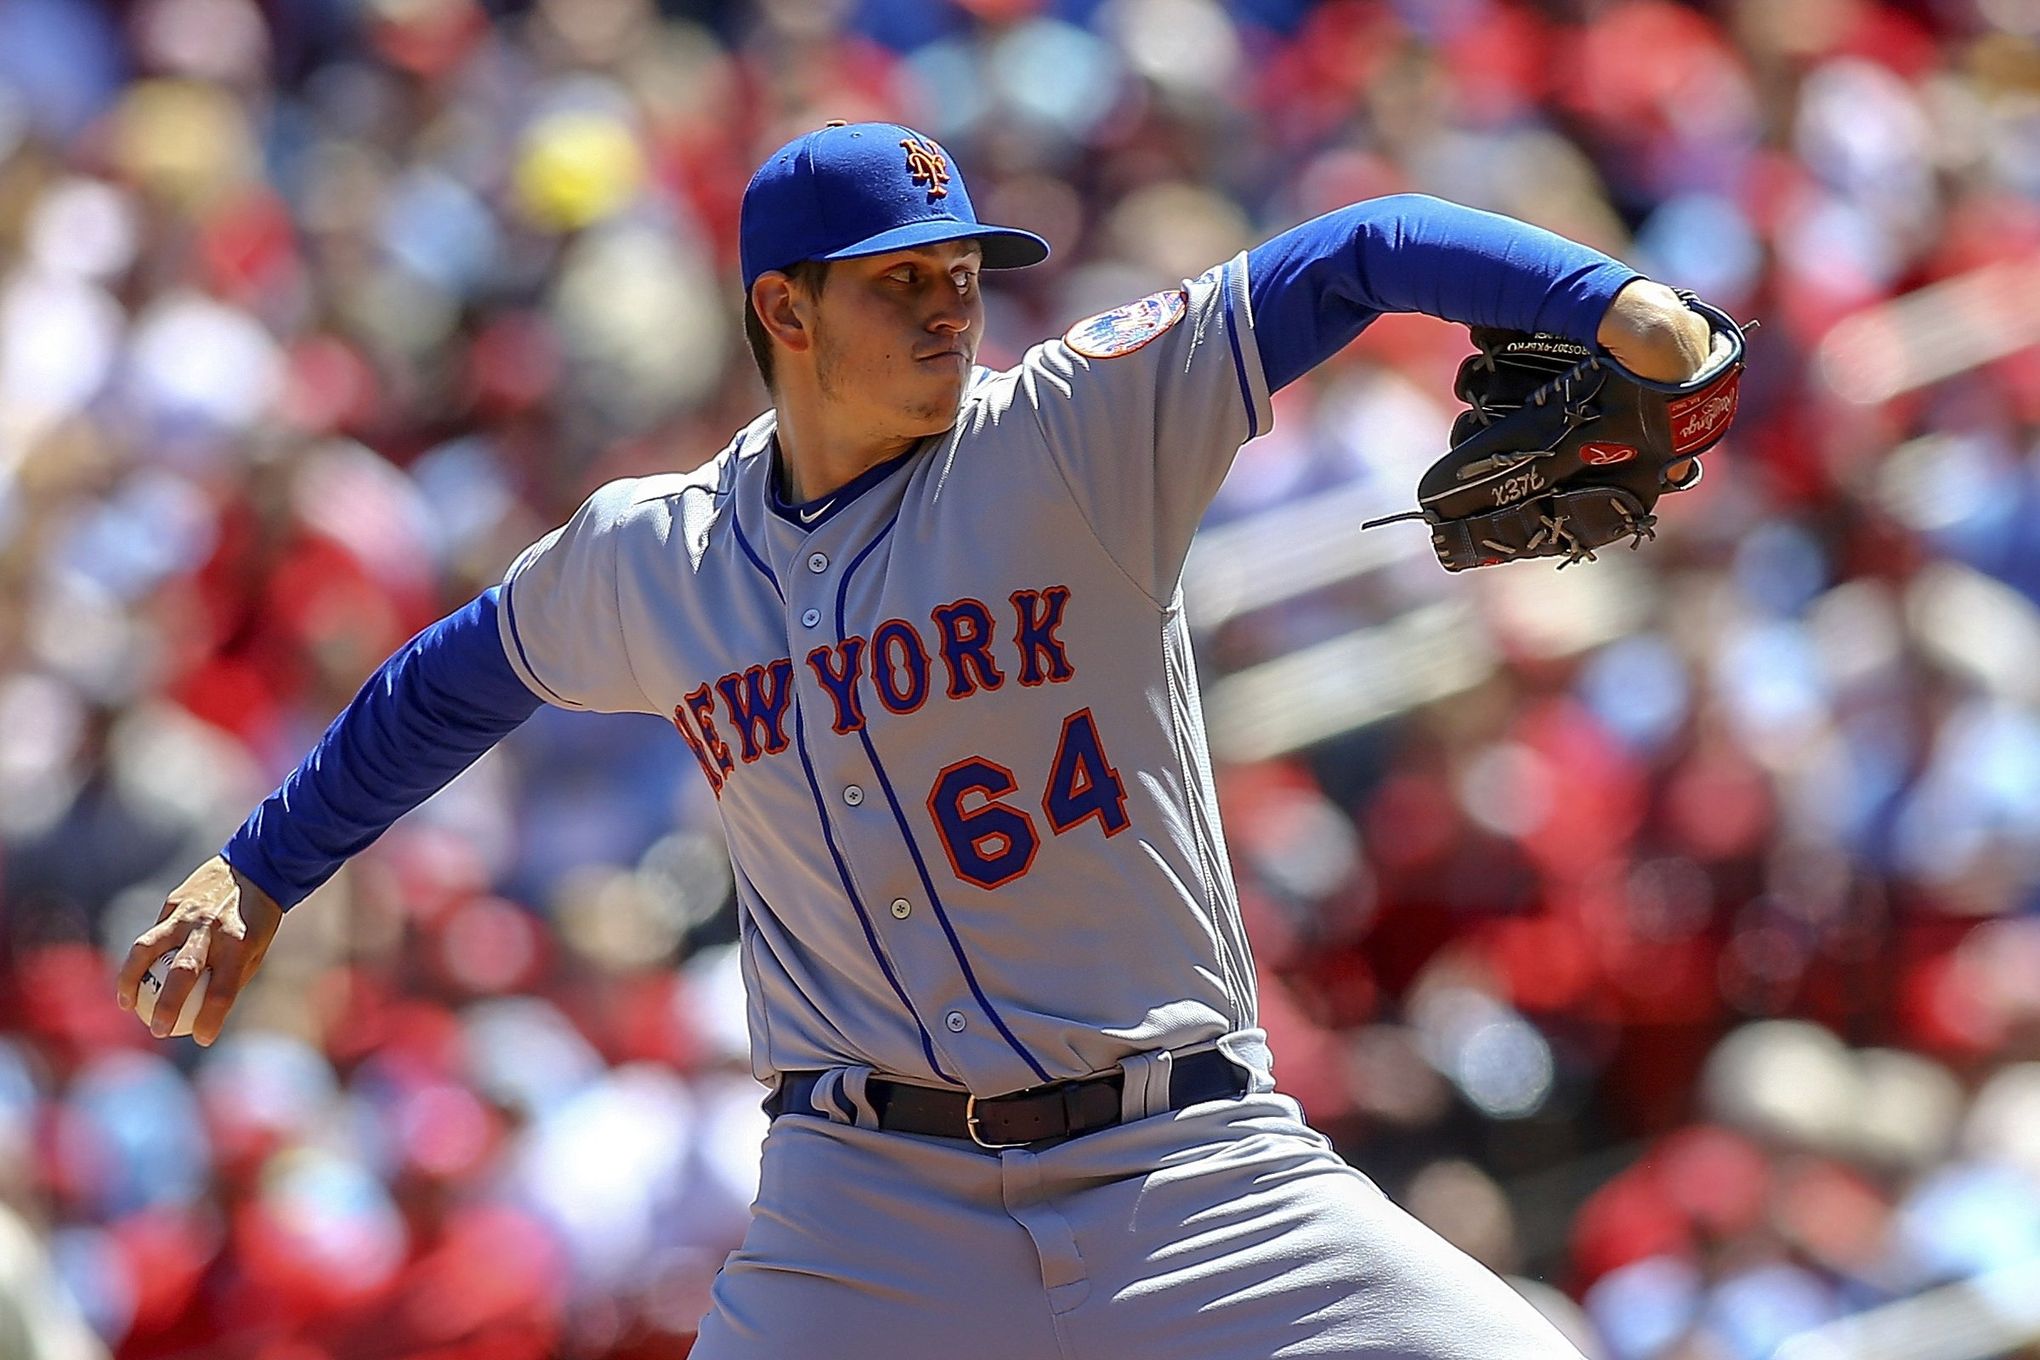 Mets pitching coach debunks notion that deGrom was tipping pitches